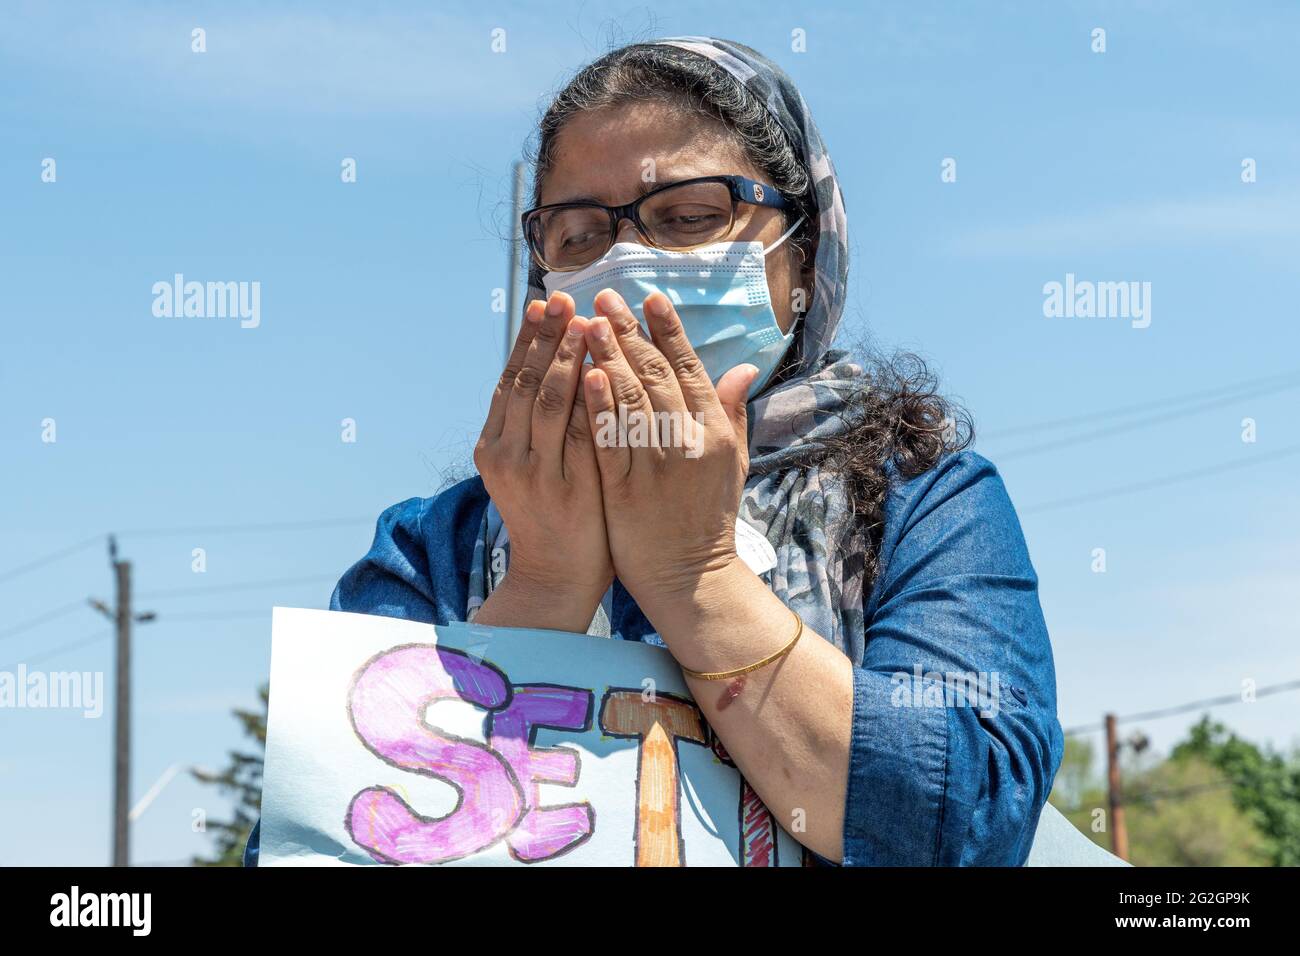 Toronto, Canada-June 11, 2021: A walk against hate & islamophobia was held in the Danforth in solidarity with the family killed in London, Ontario Stock Photo